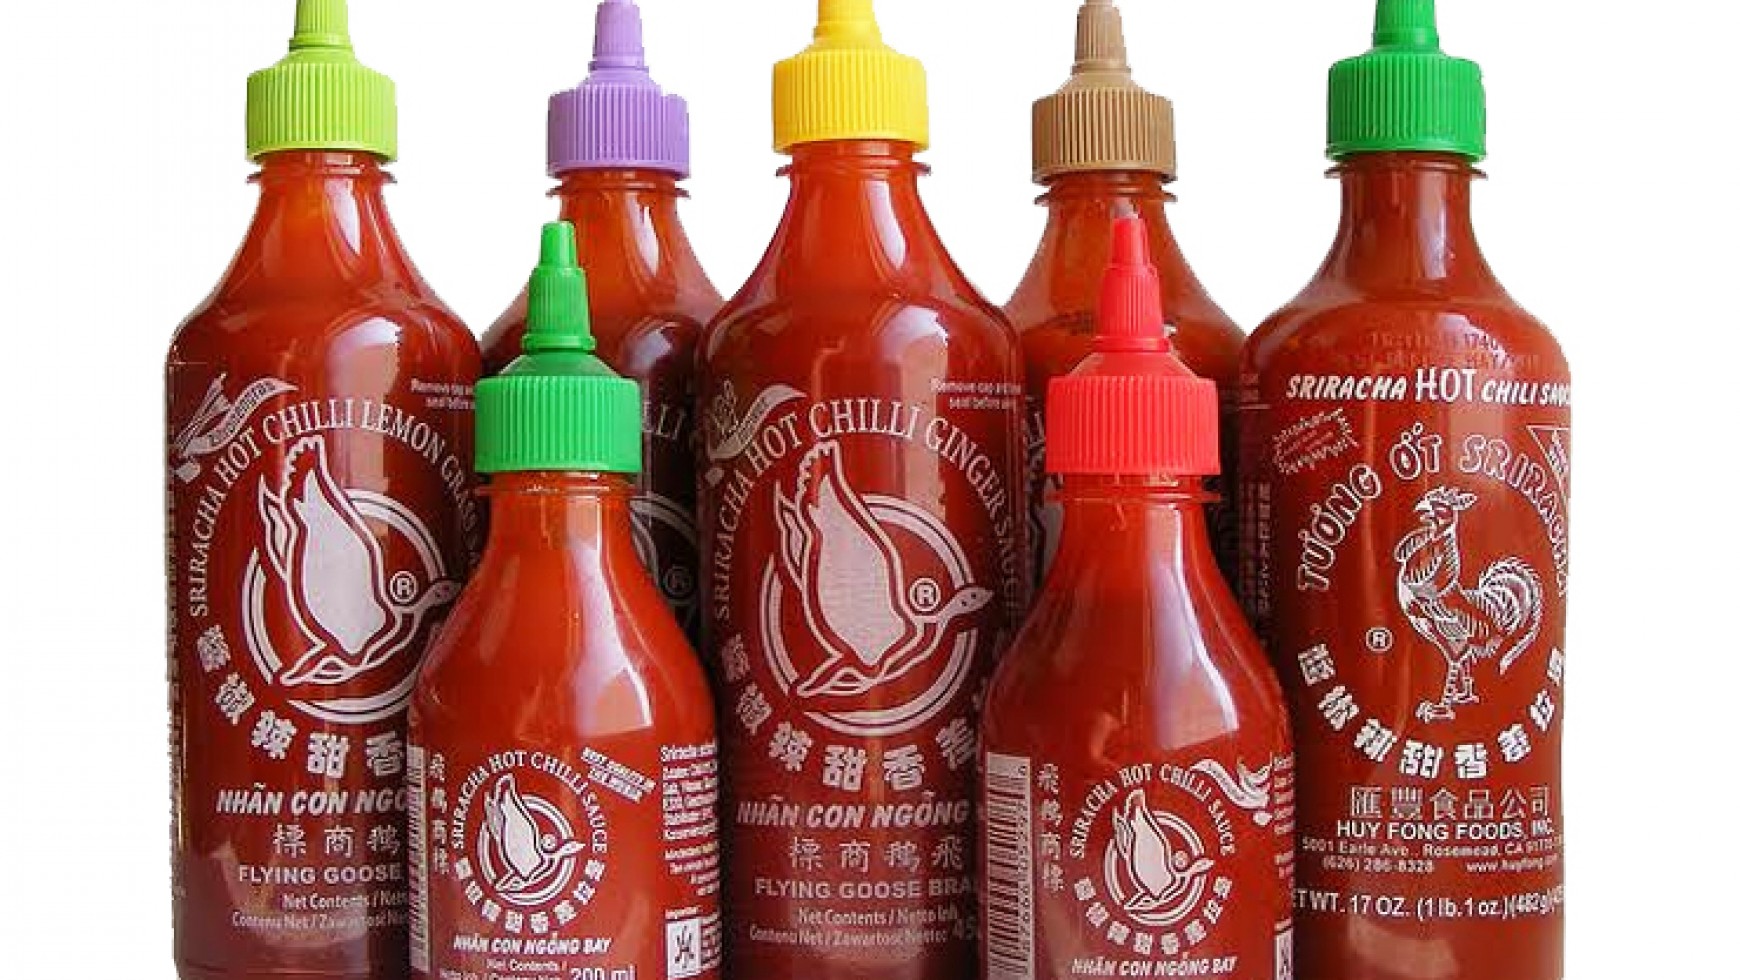 Hot right now: how Sriracha has become a must-have sauce, The Guardian